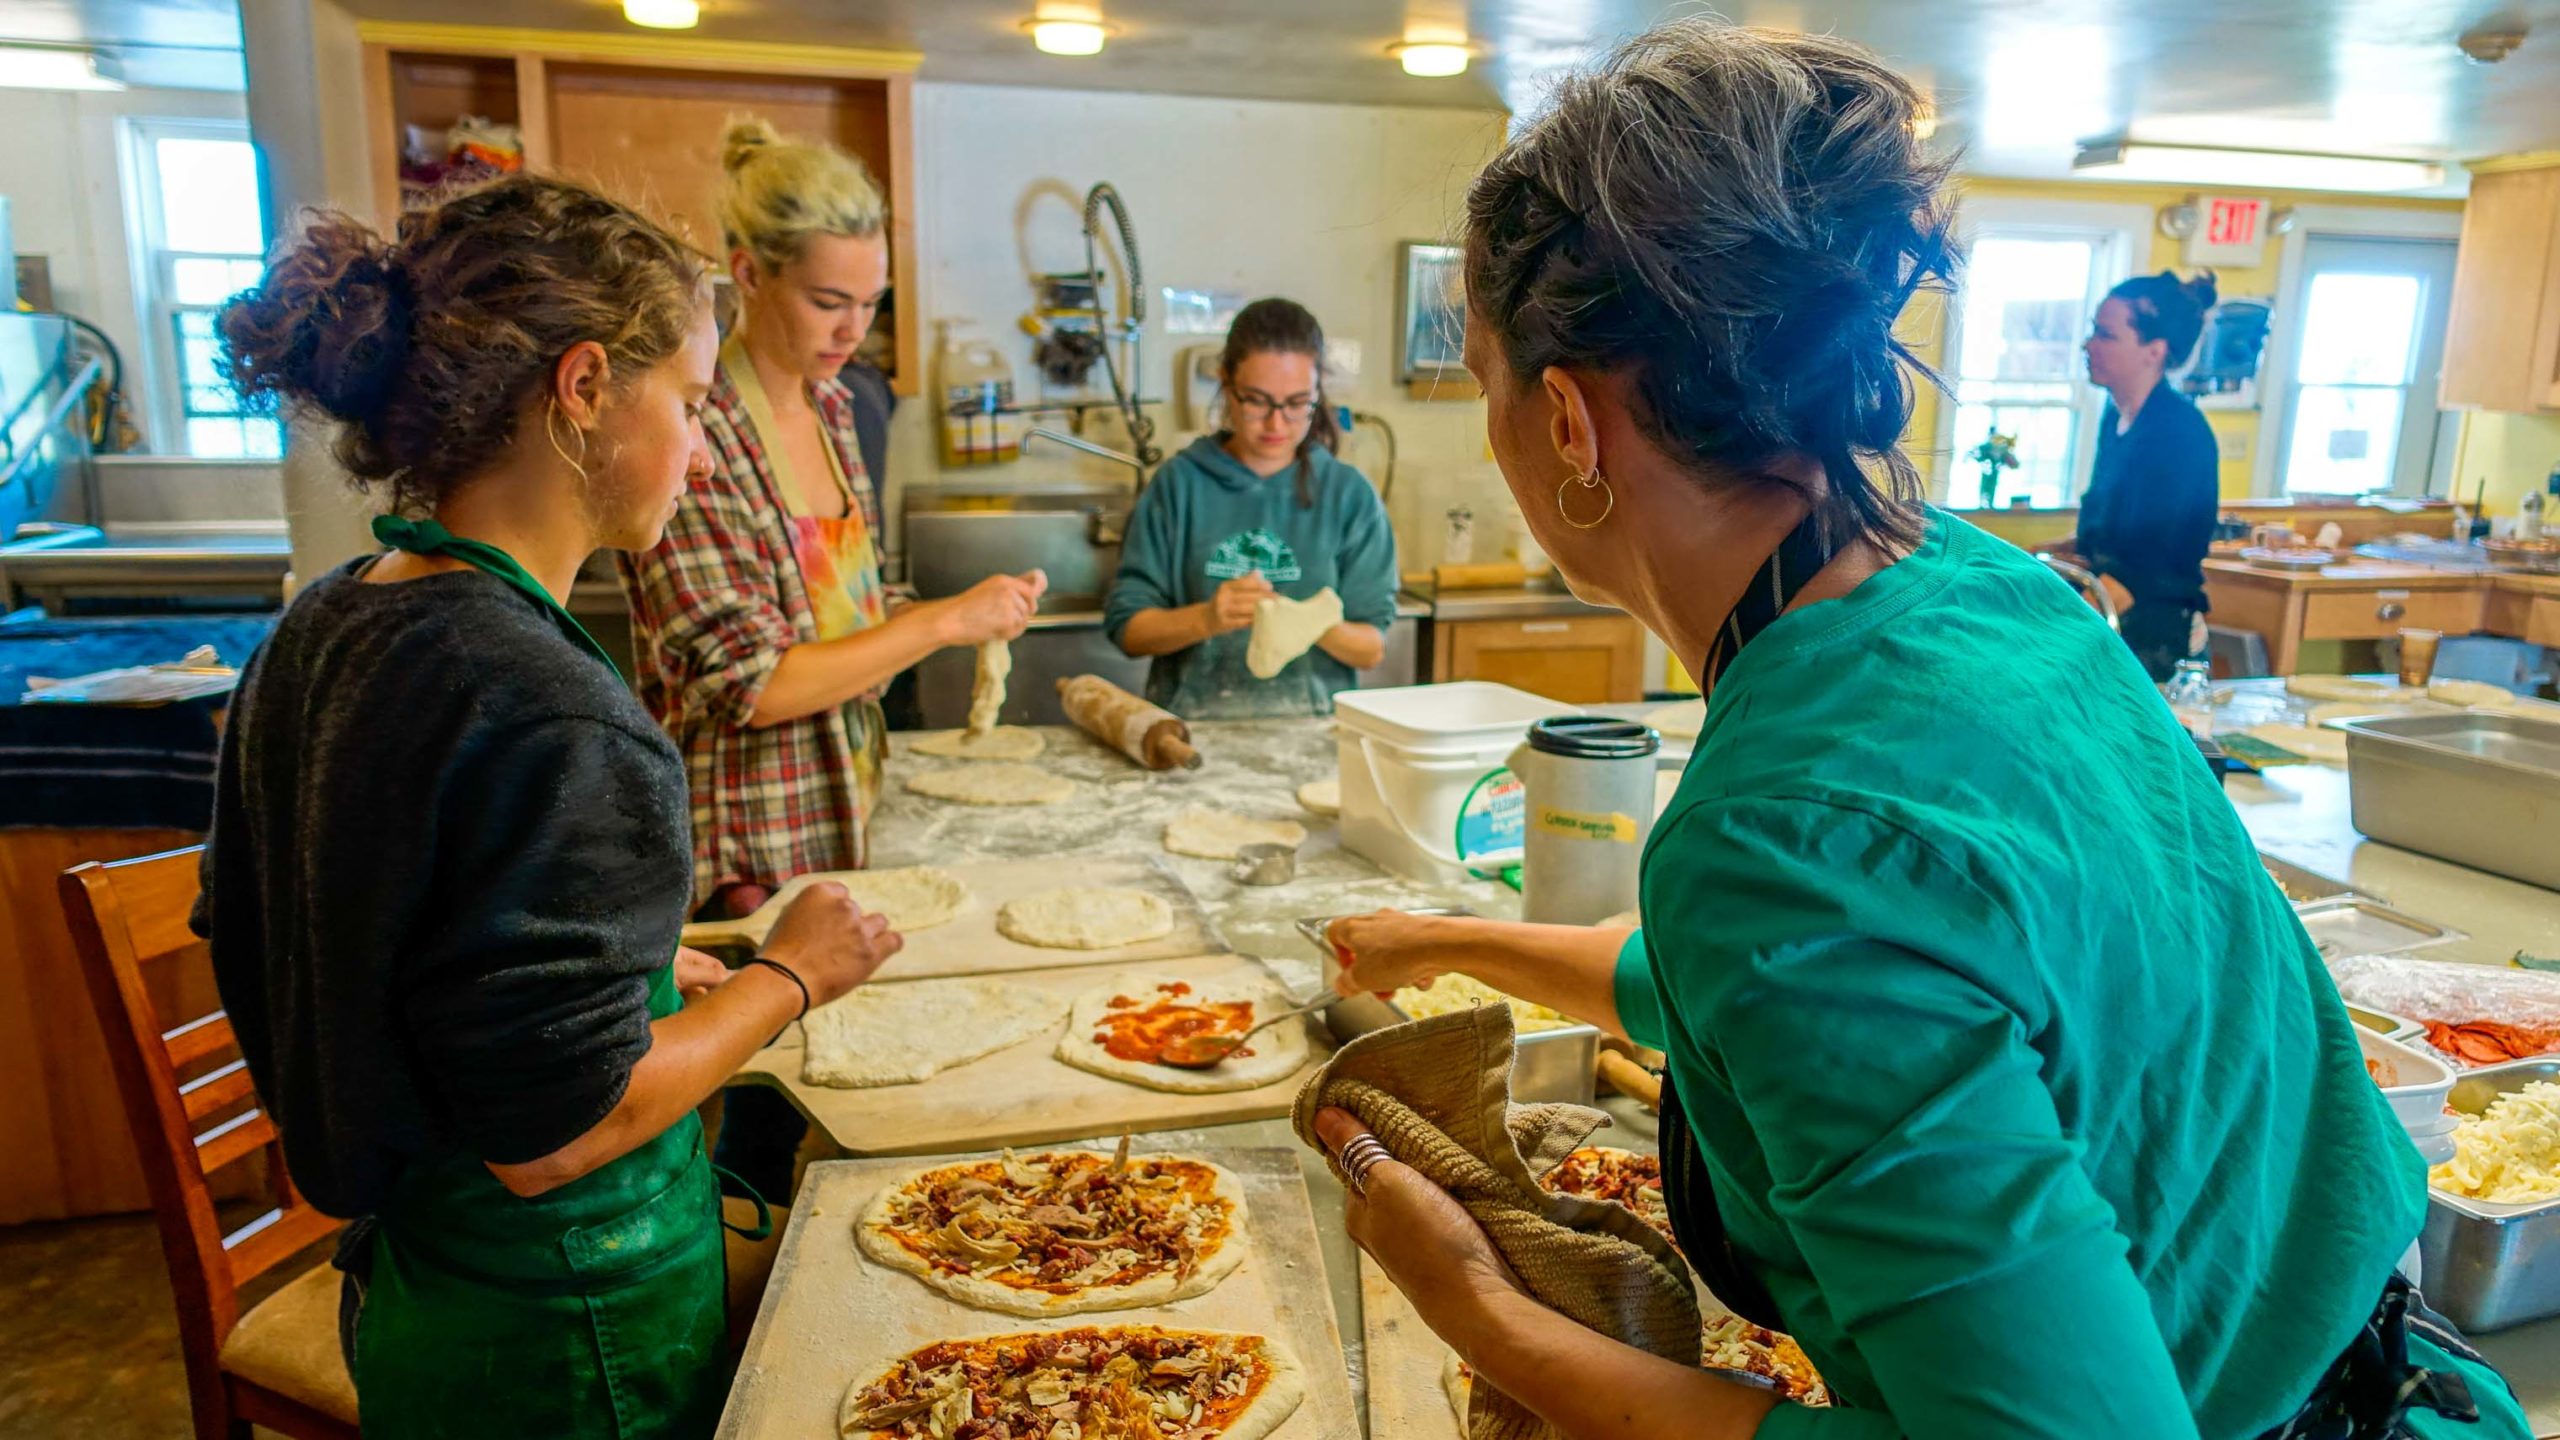 People working in the camp kitchen making pizzas.